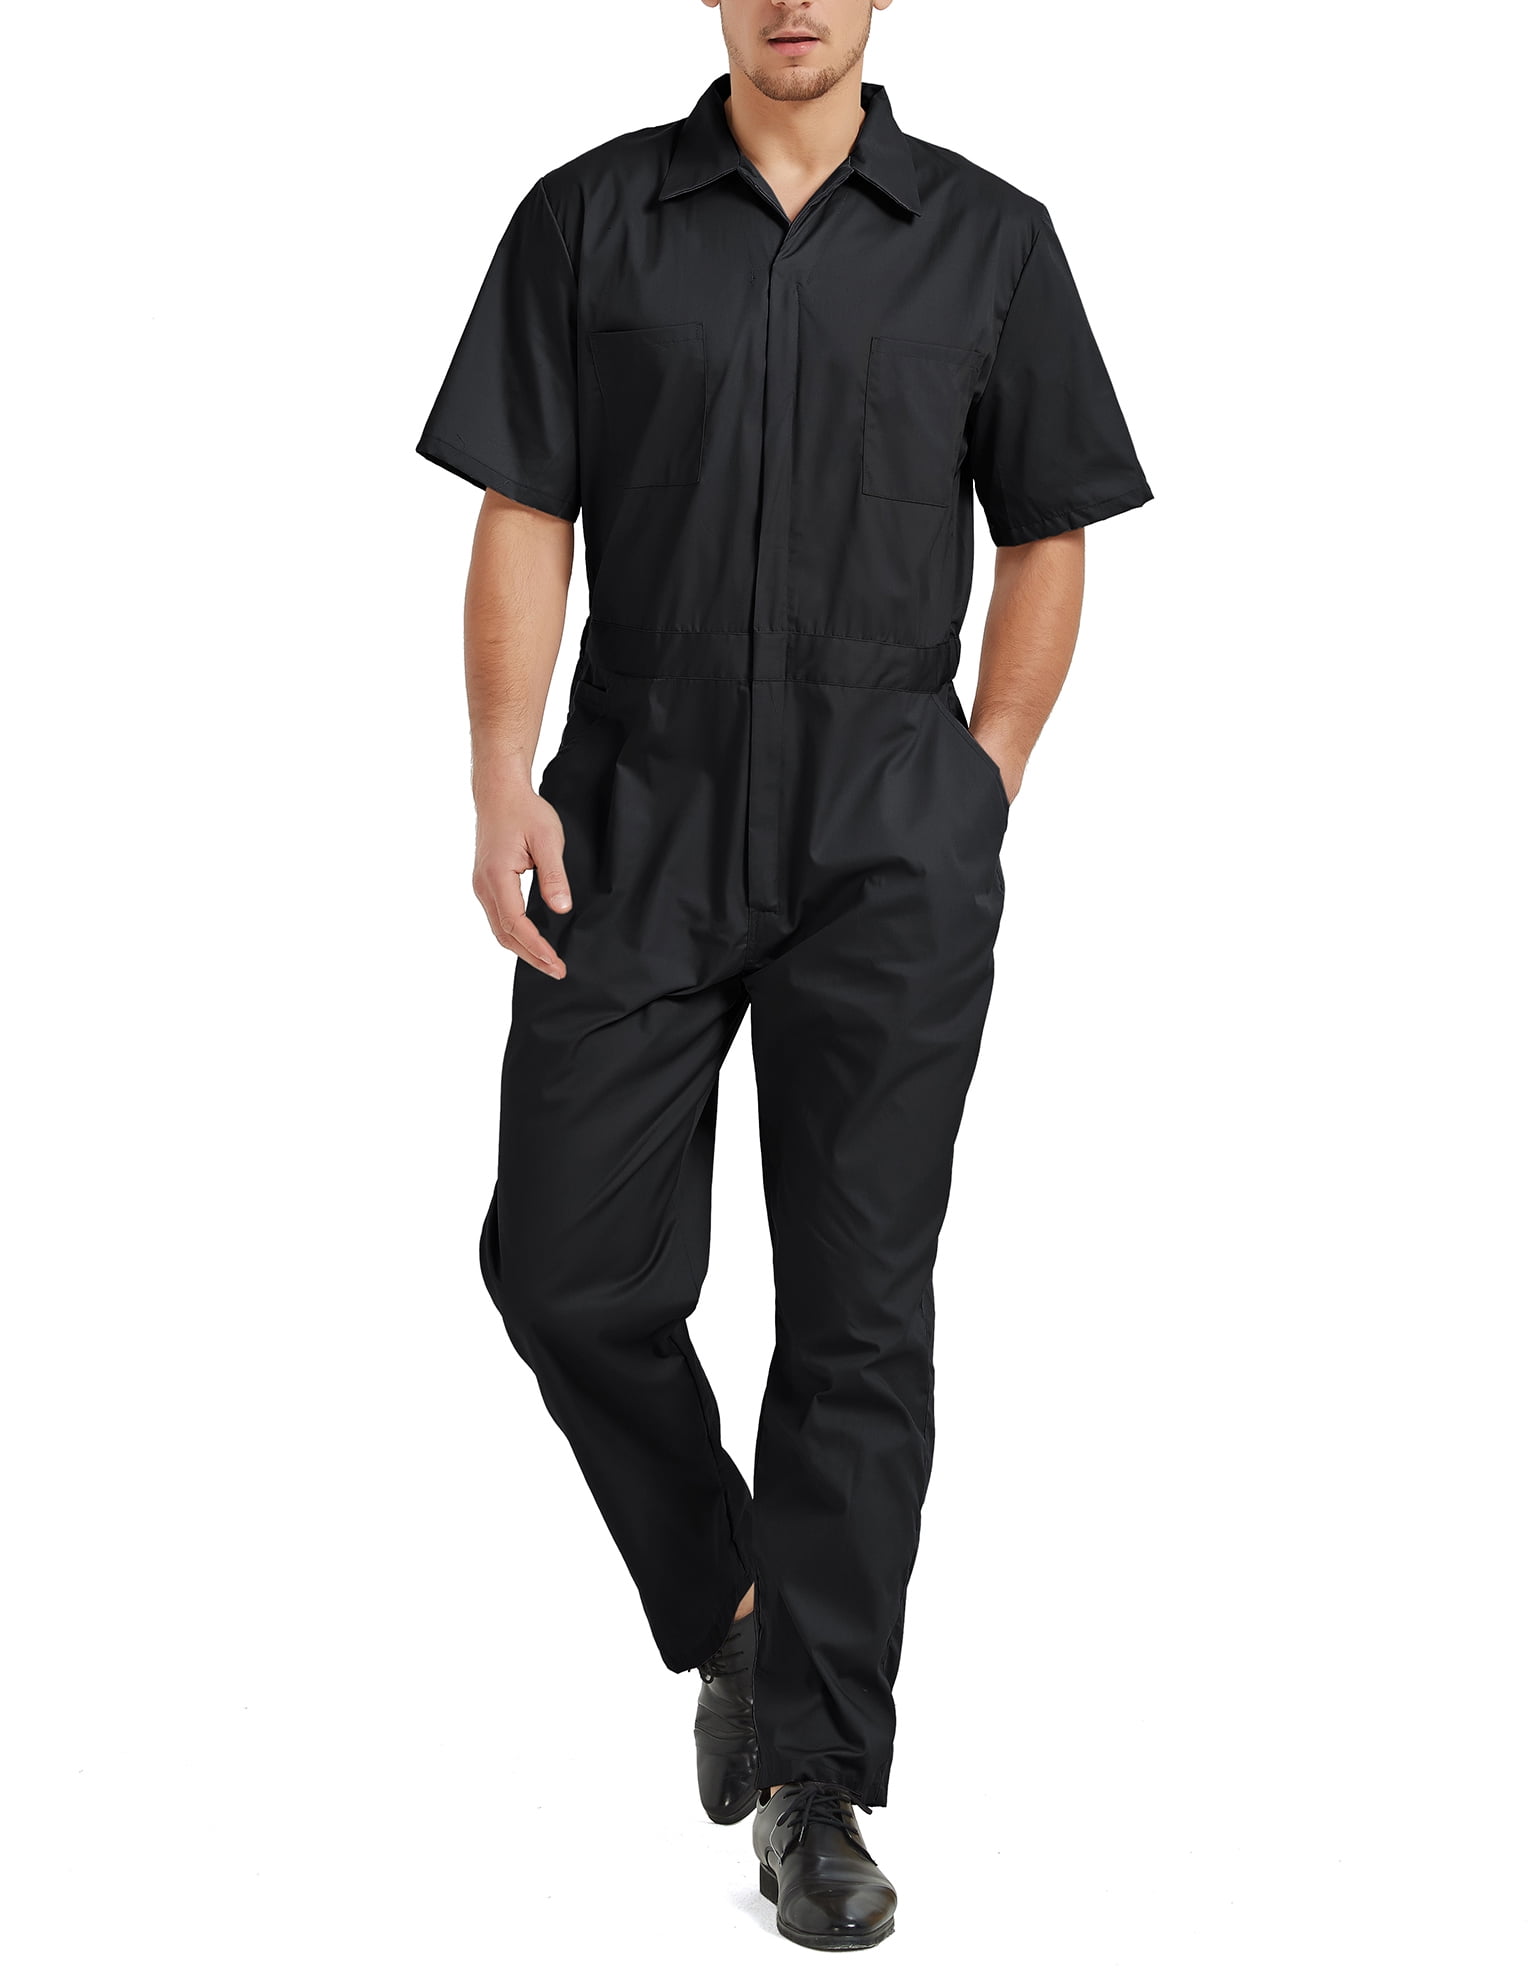 TopTie Mens Light Weight Short-Sleeve Work Coverall with Elastic Waist 